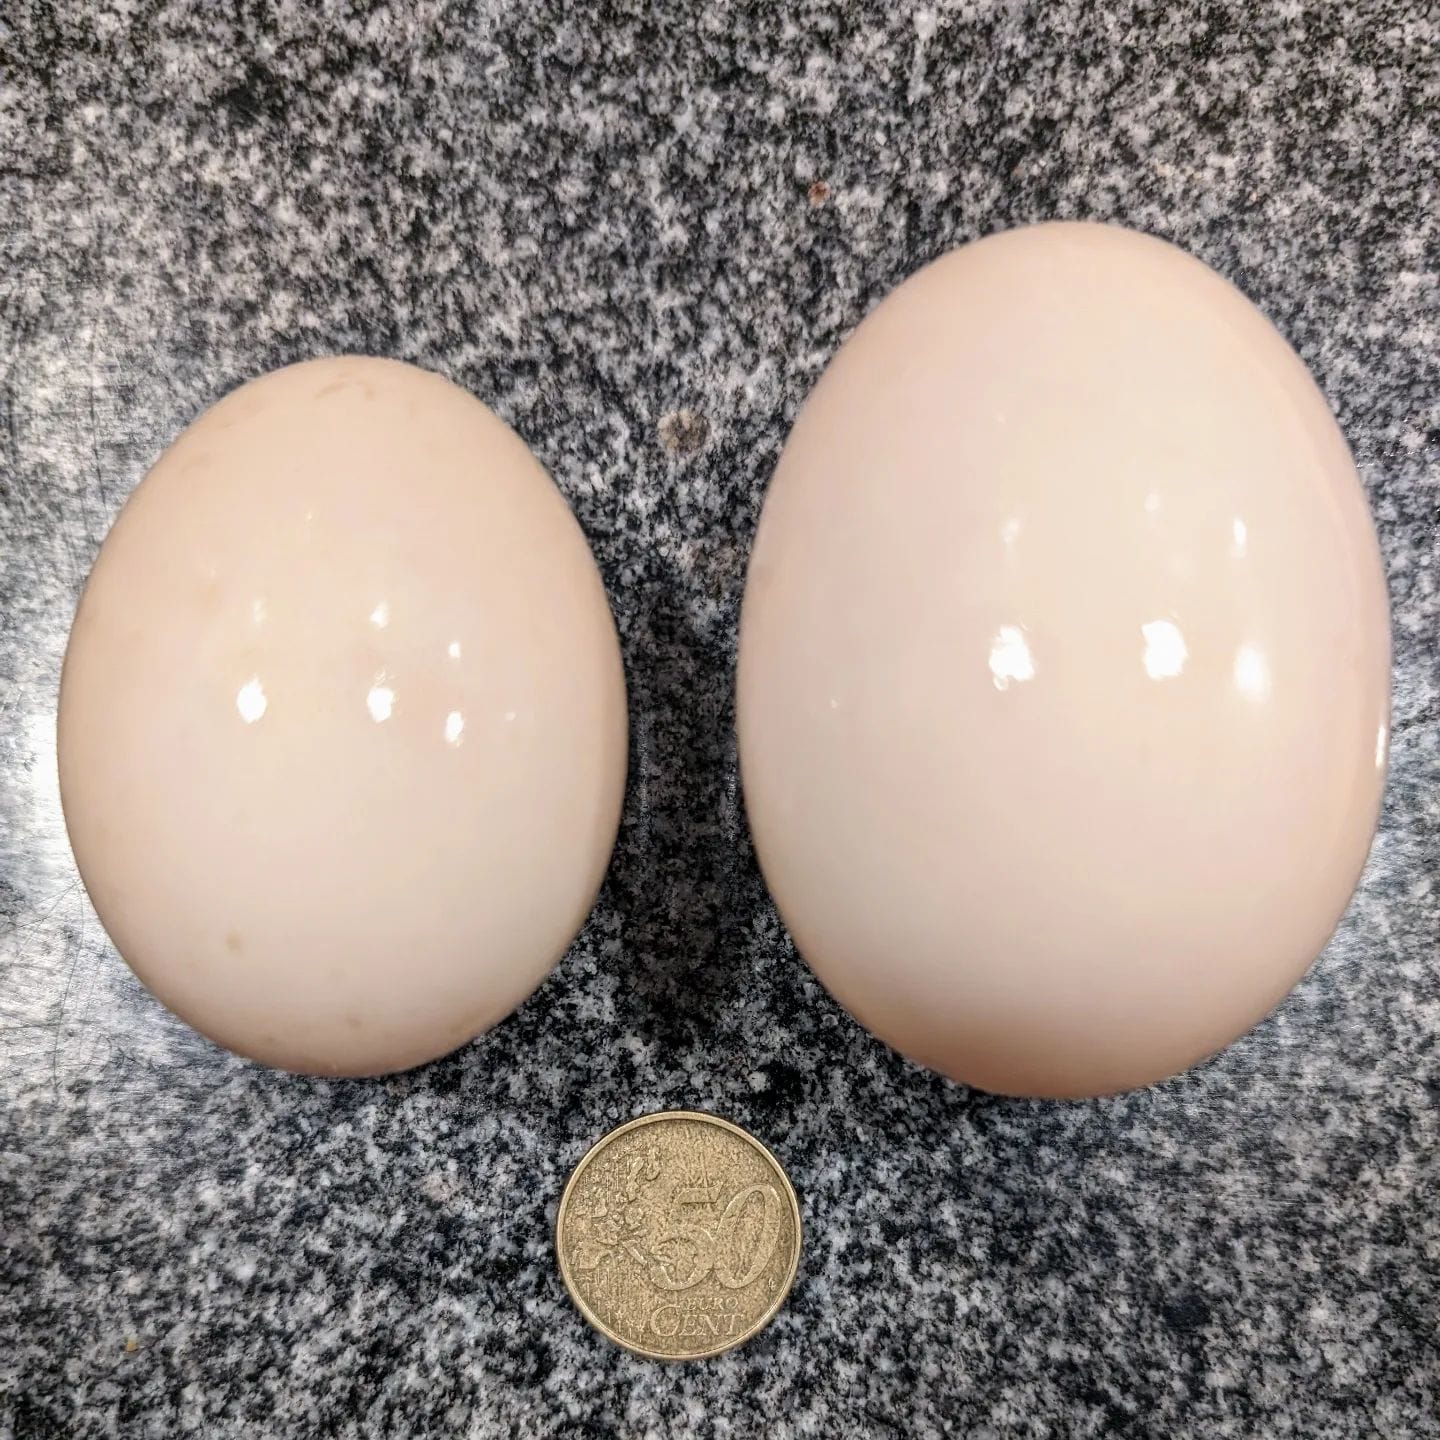 Hard workers: our ducks typically lay fairly large eggs, such as the one on the left in this photo